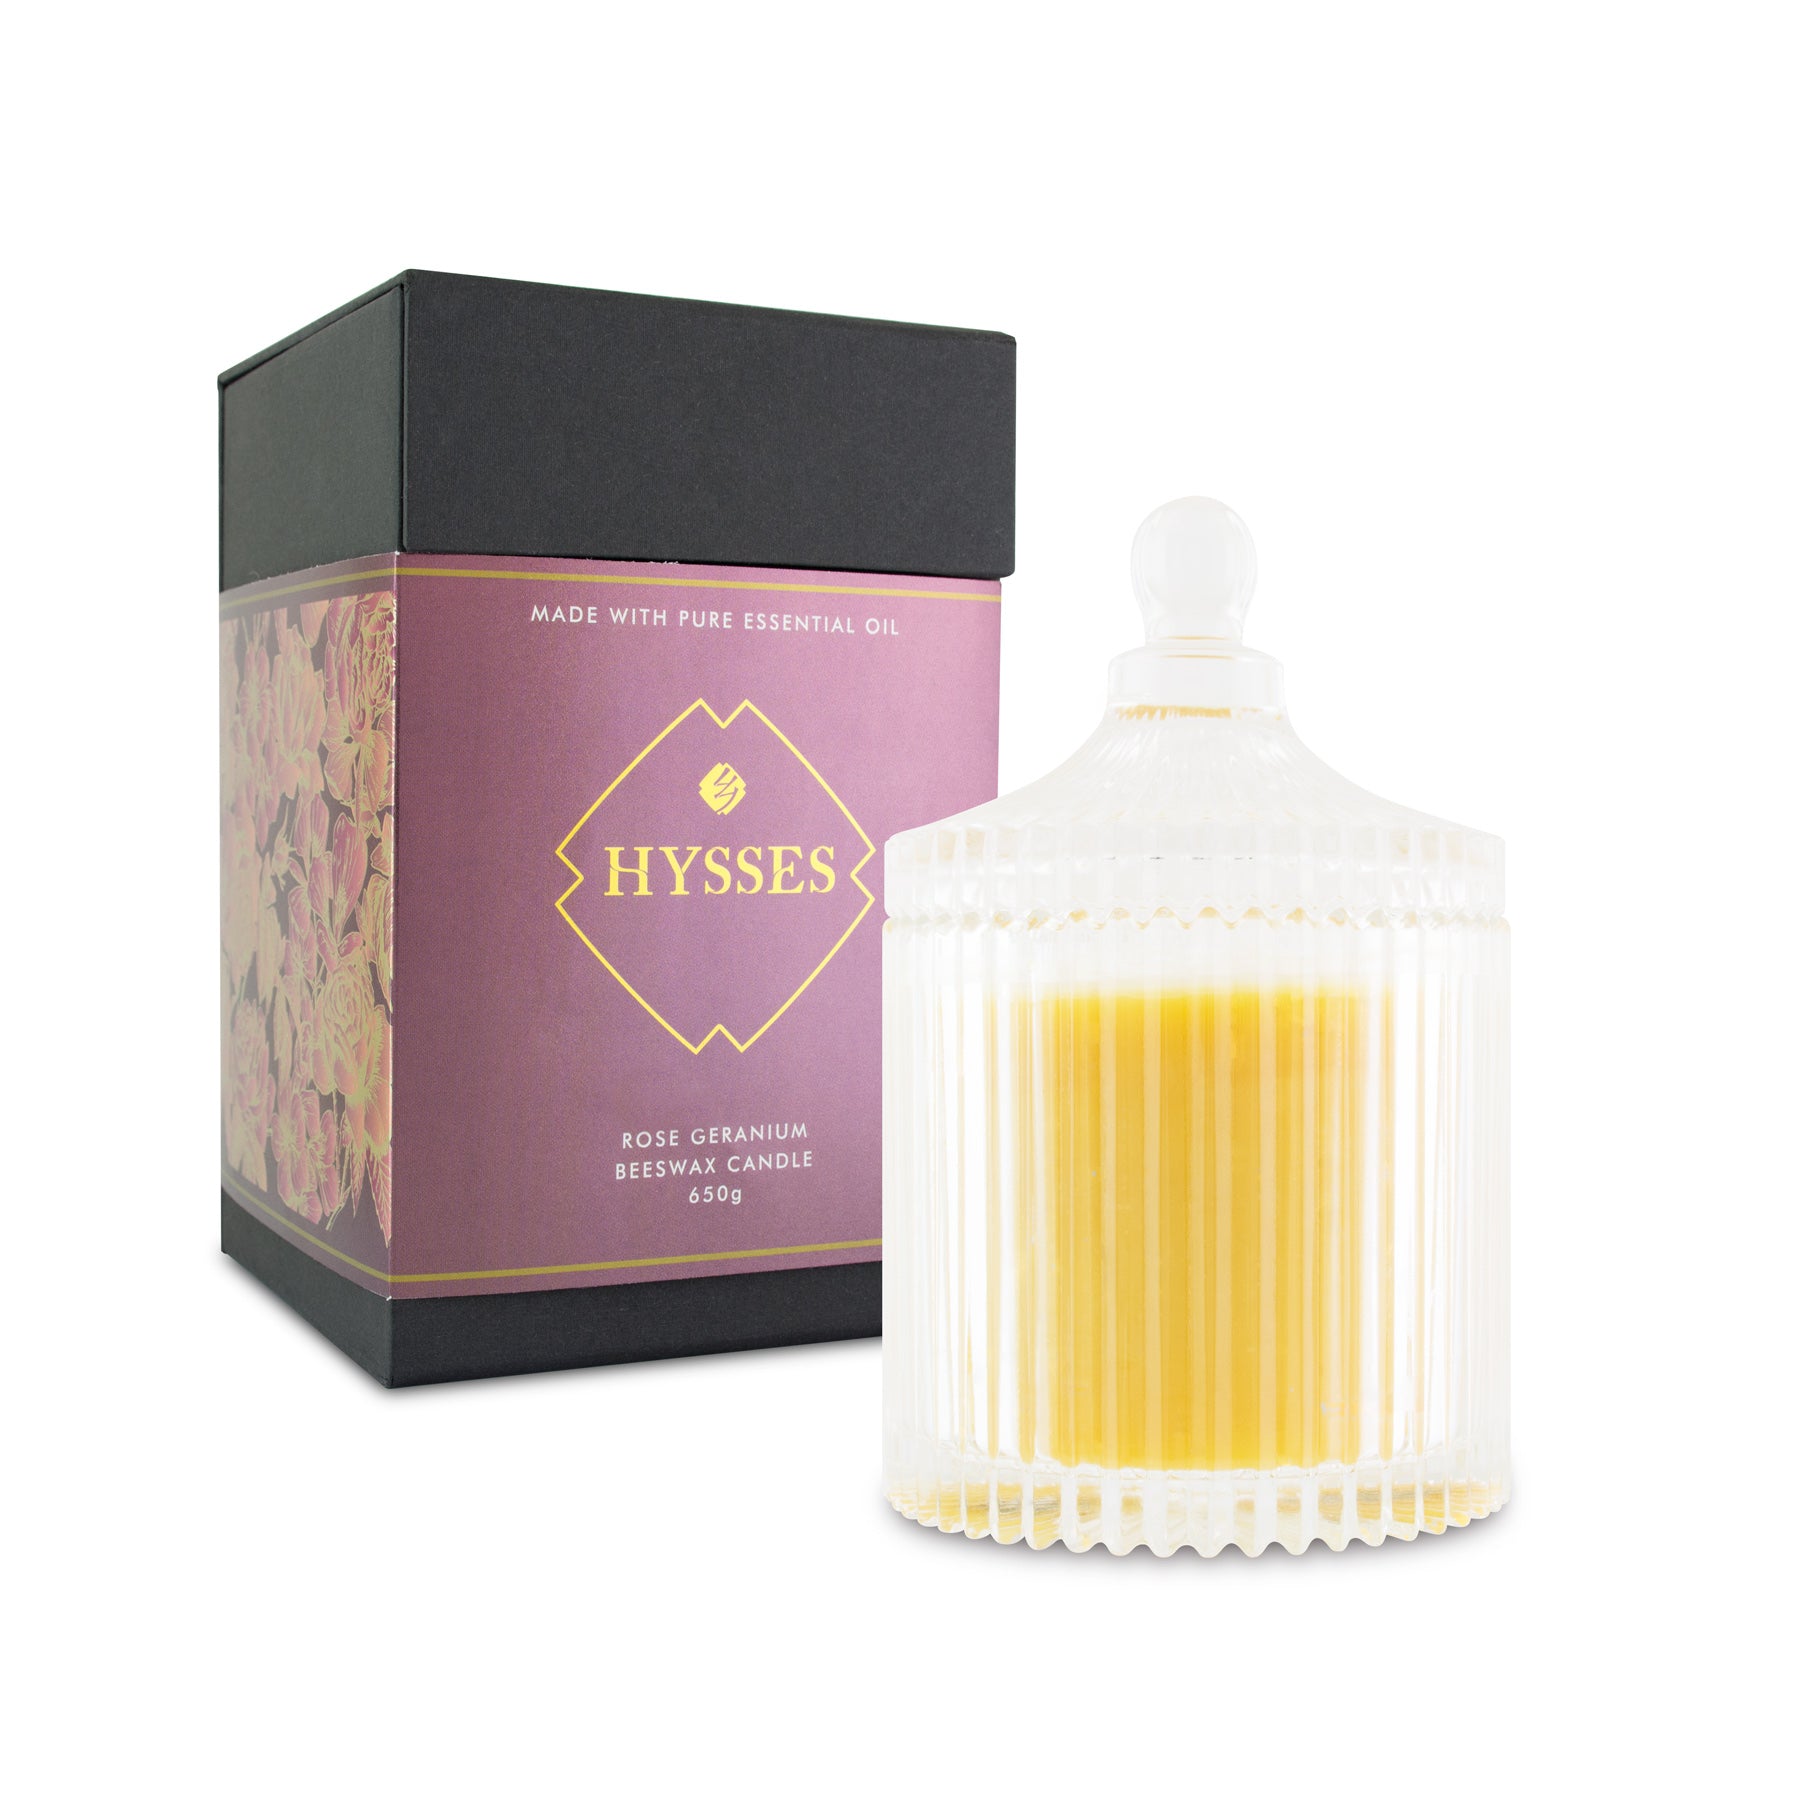 Rose Geranium Beeswax Candle - HYSSES